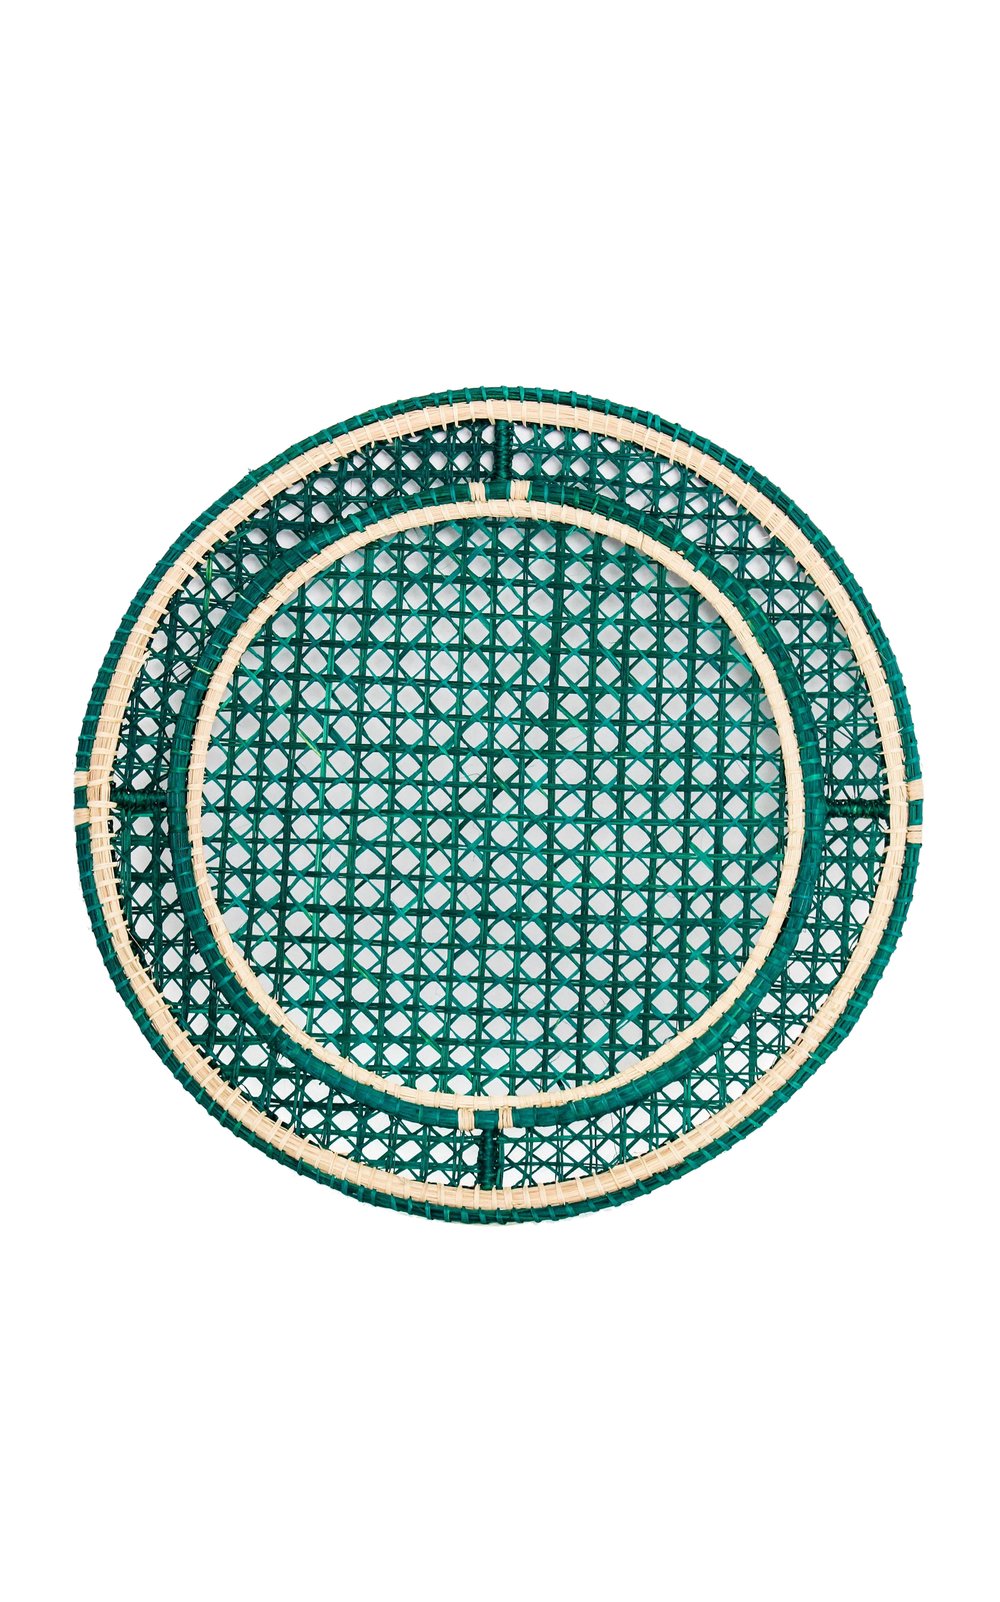 sonder-and-holliday-dark-green-the-buendia-signature-cane-placemat.jpg